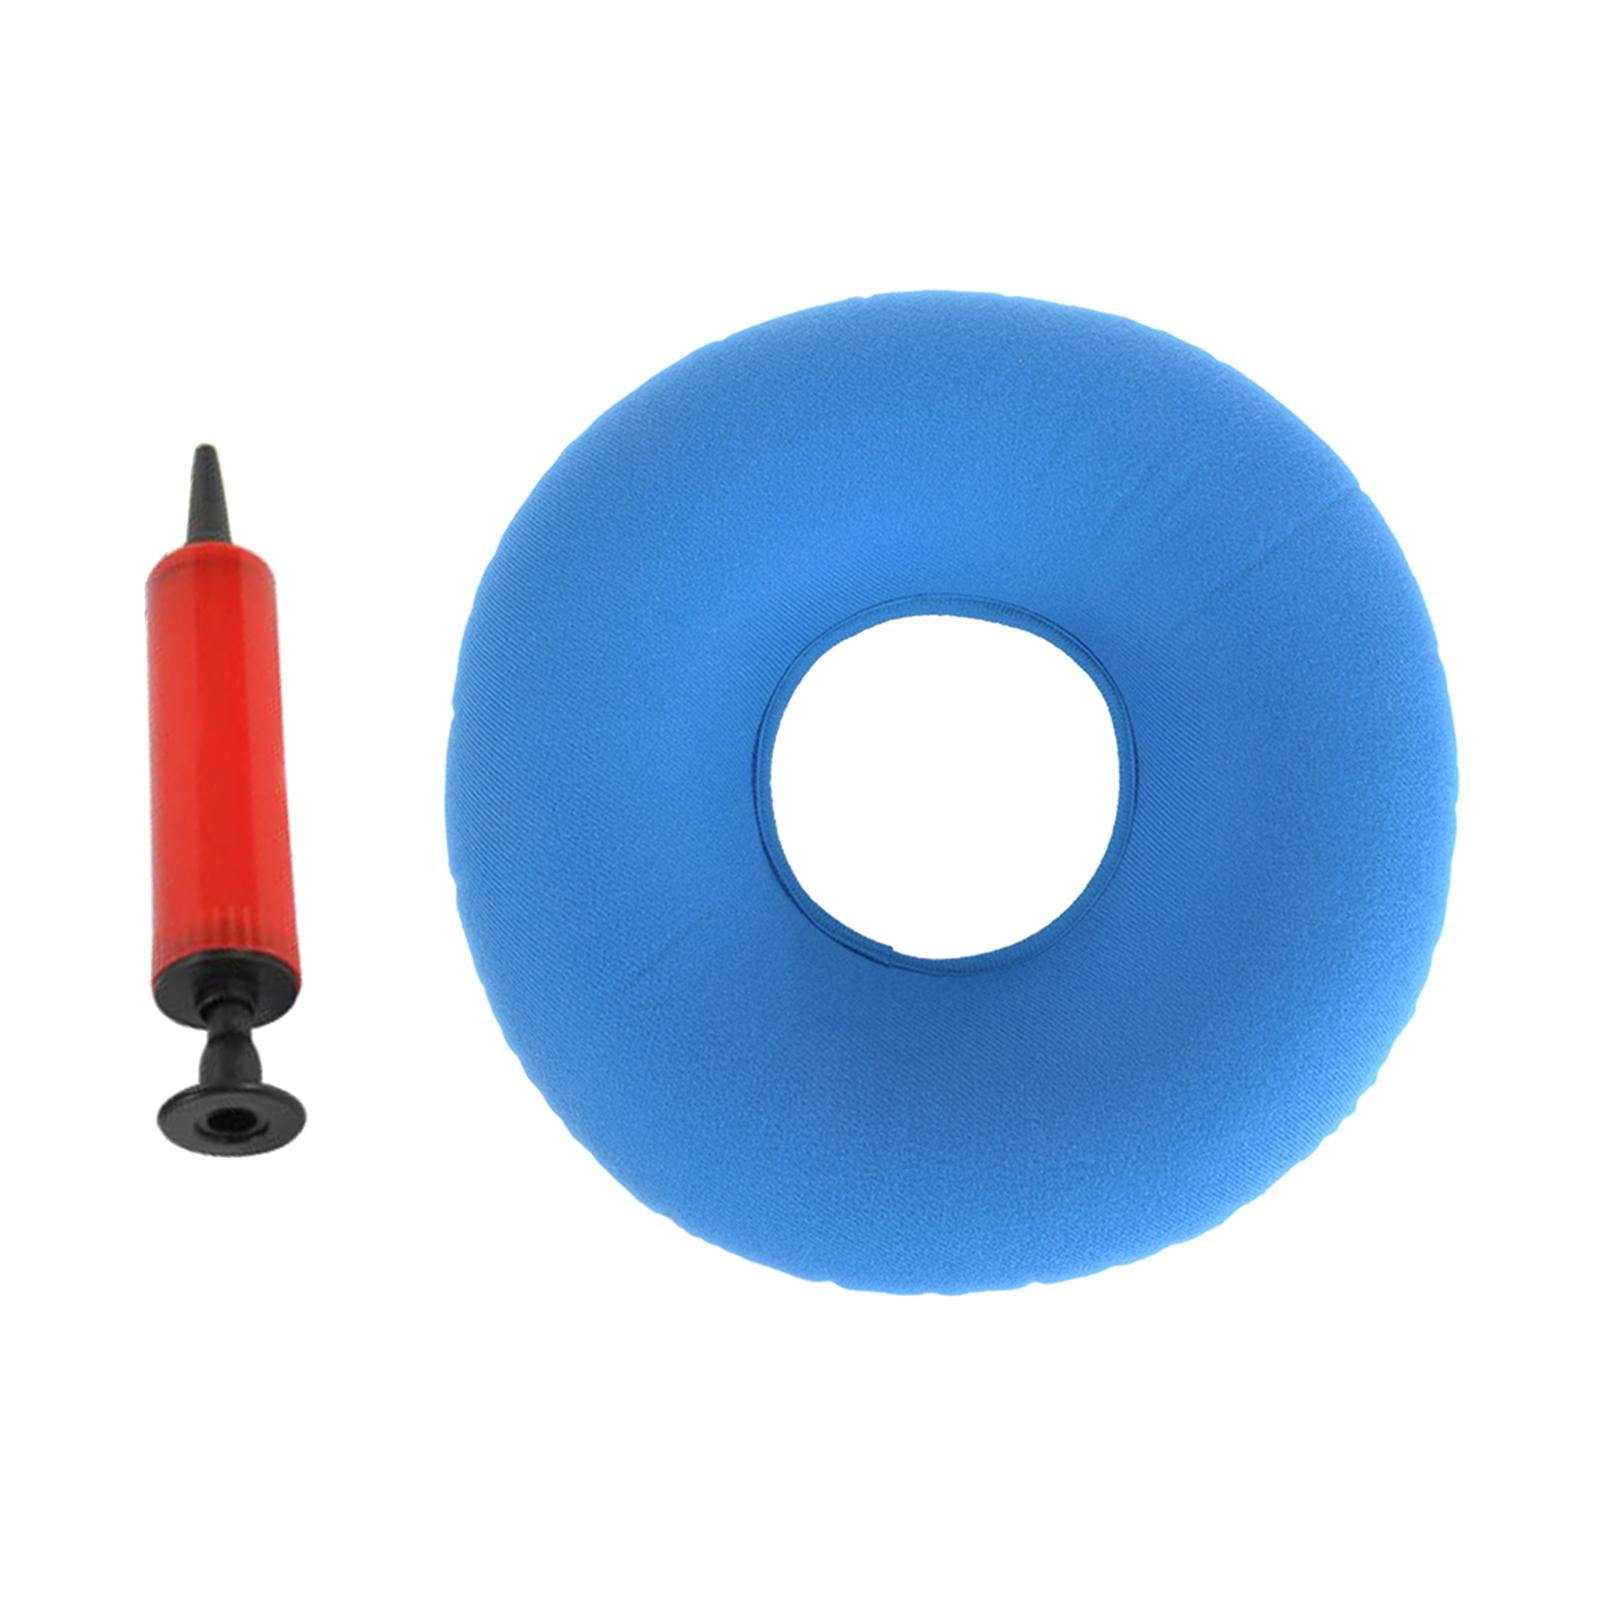 Donut Seat Cushion Hemorrhoids Pillow Bedsore Prevention With Inflator Pump